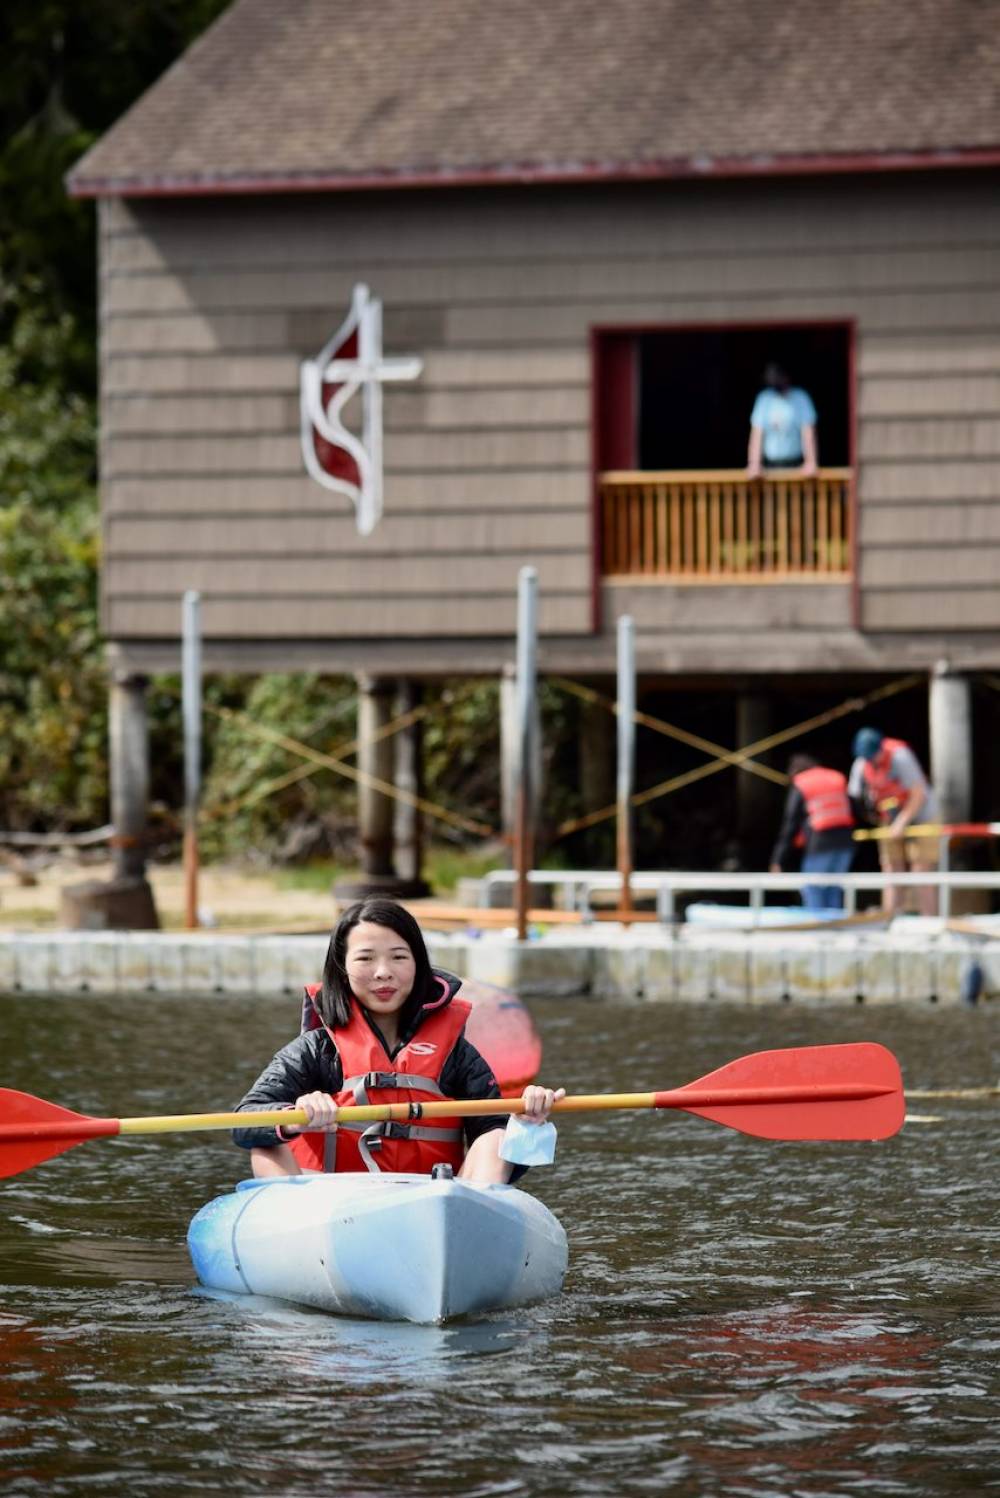 TOP OREGON ADVENTURE CAMP: Camp Magruder is a Top Adventure Summer Camp located in Rockaway Beach Oregon offering many fun and enriching Adventure and other camp programs. 